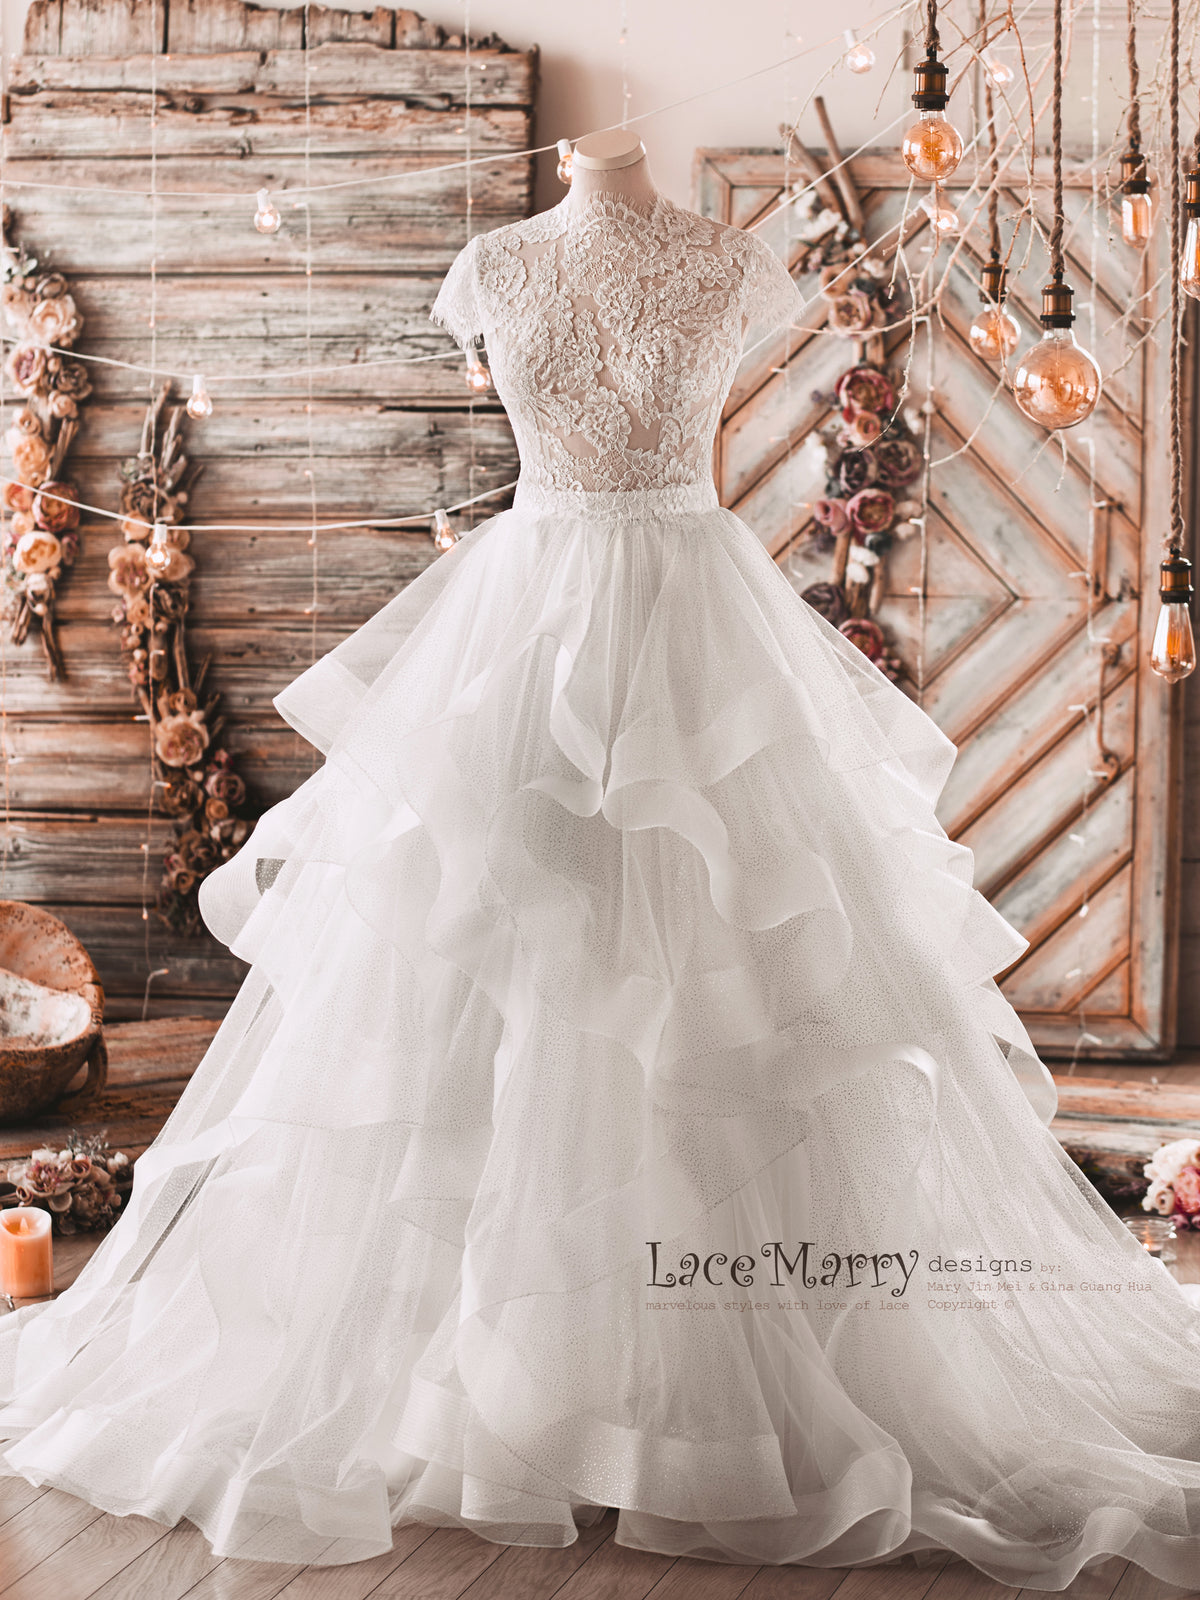 Bridal Separates Set with Lace Top and Separate Skirt